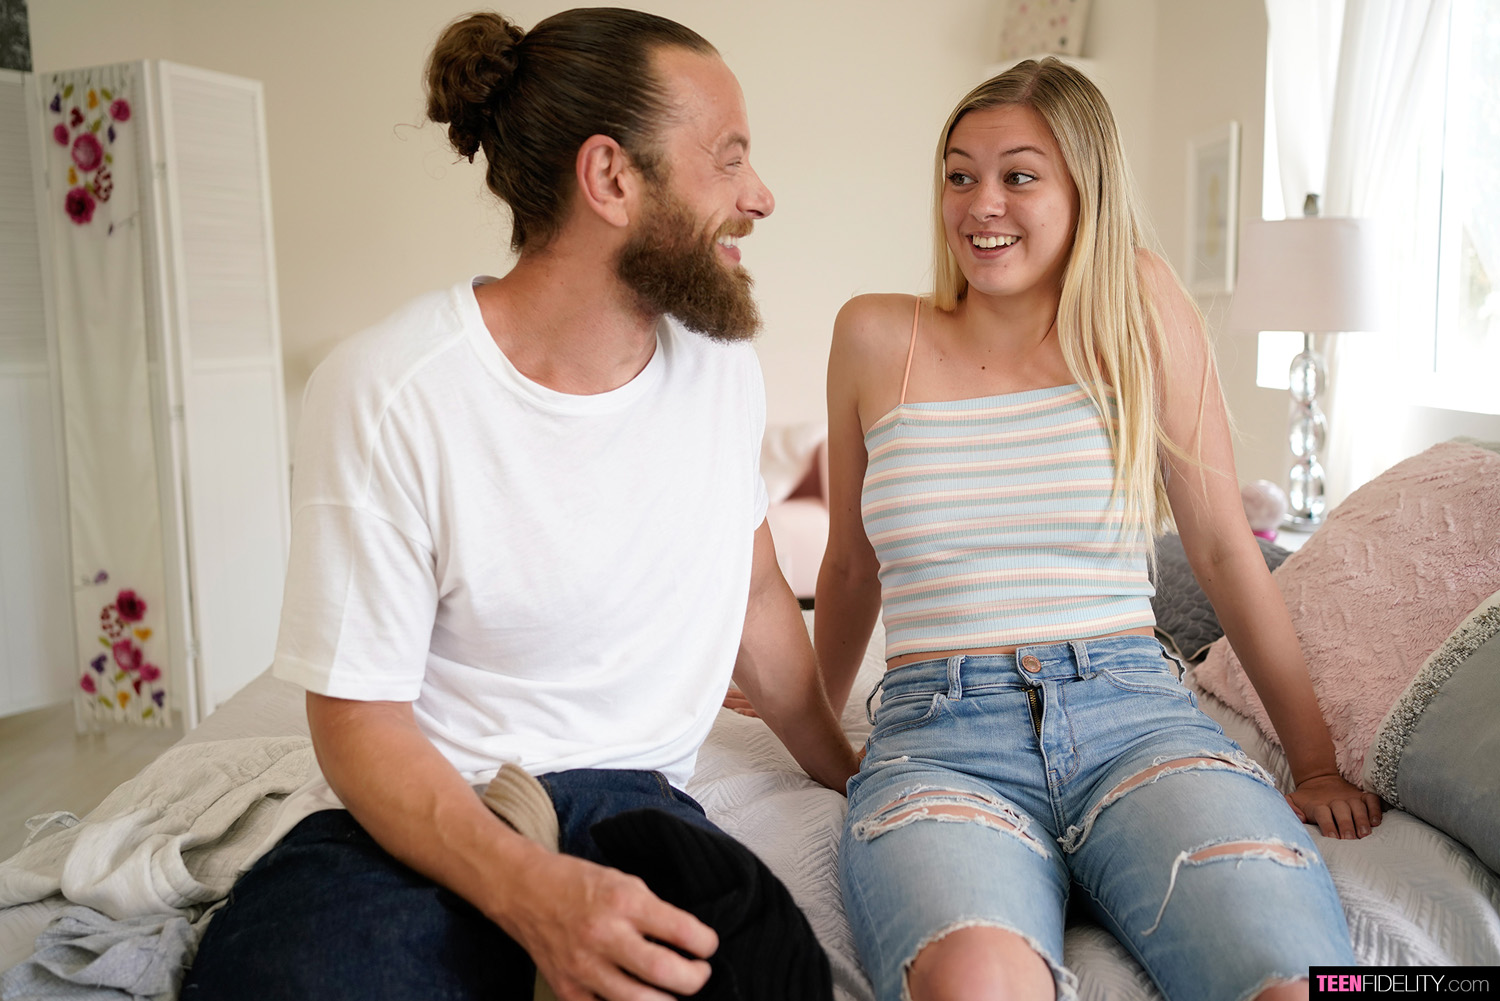 Amber Moore impatiently fucks her boyfriend who was just released from prison